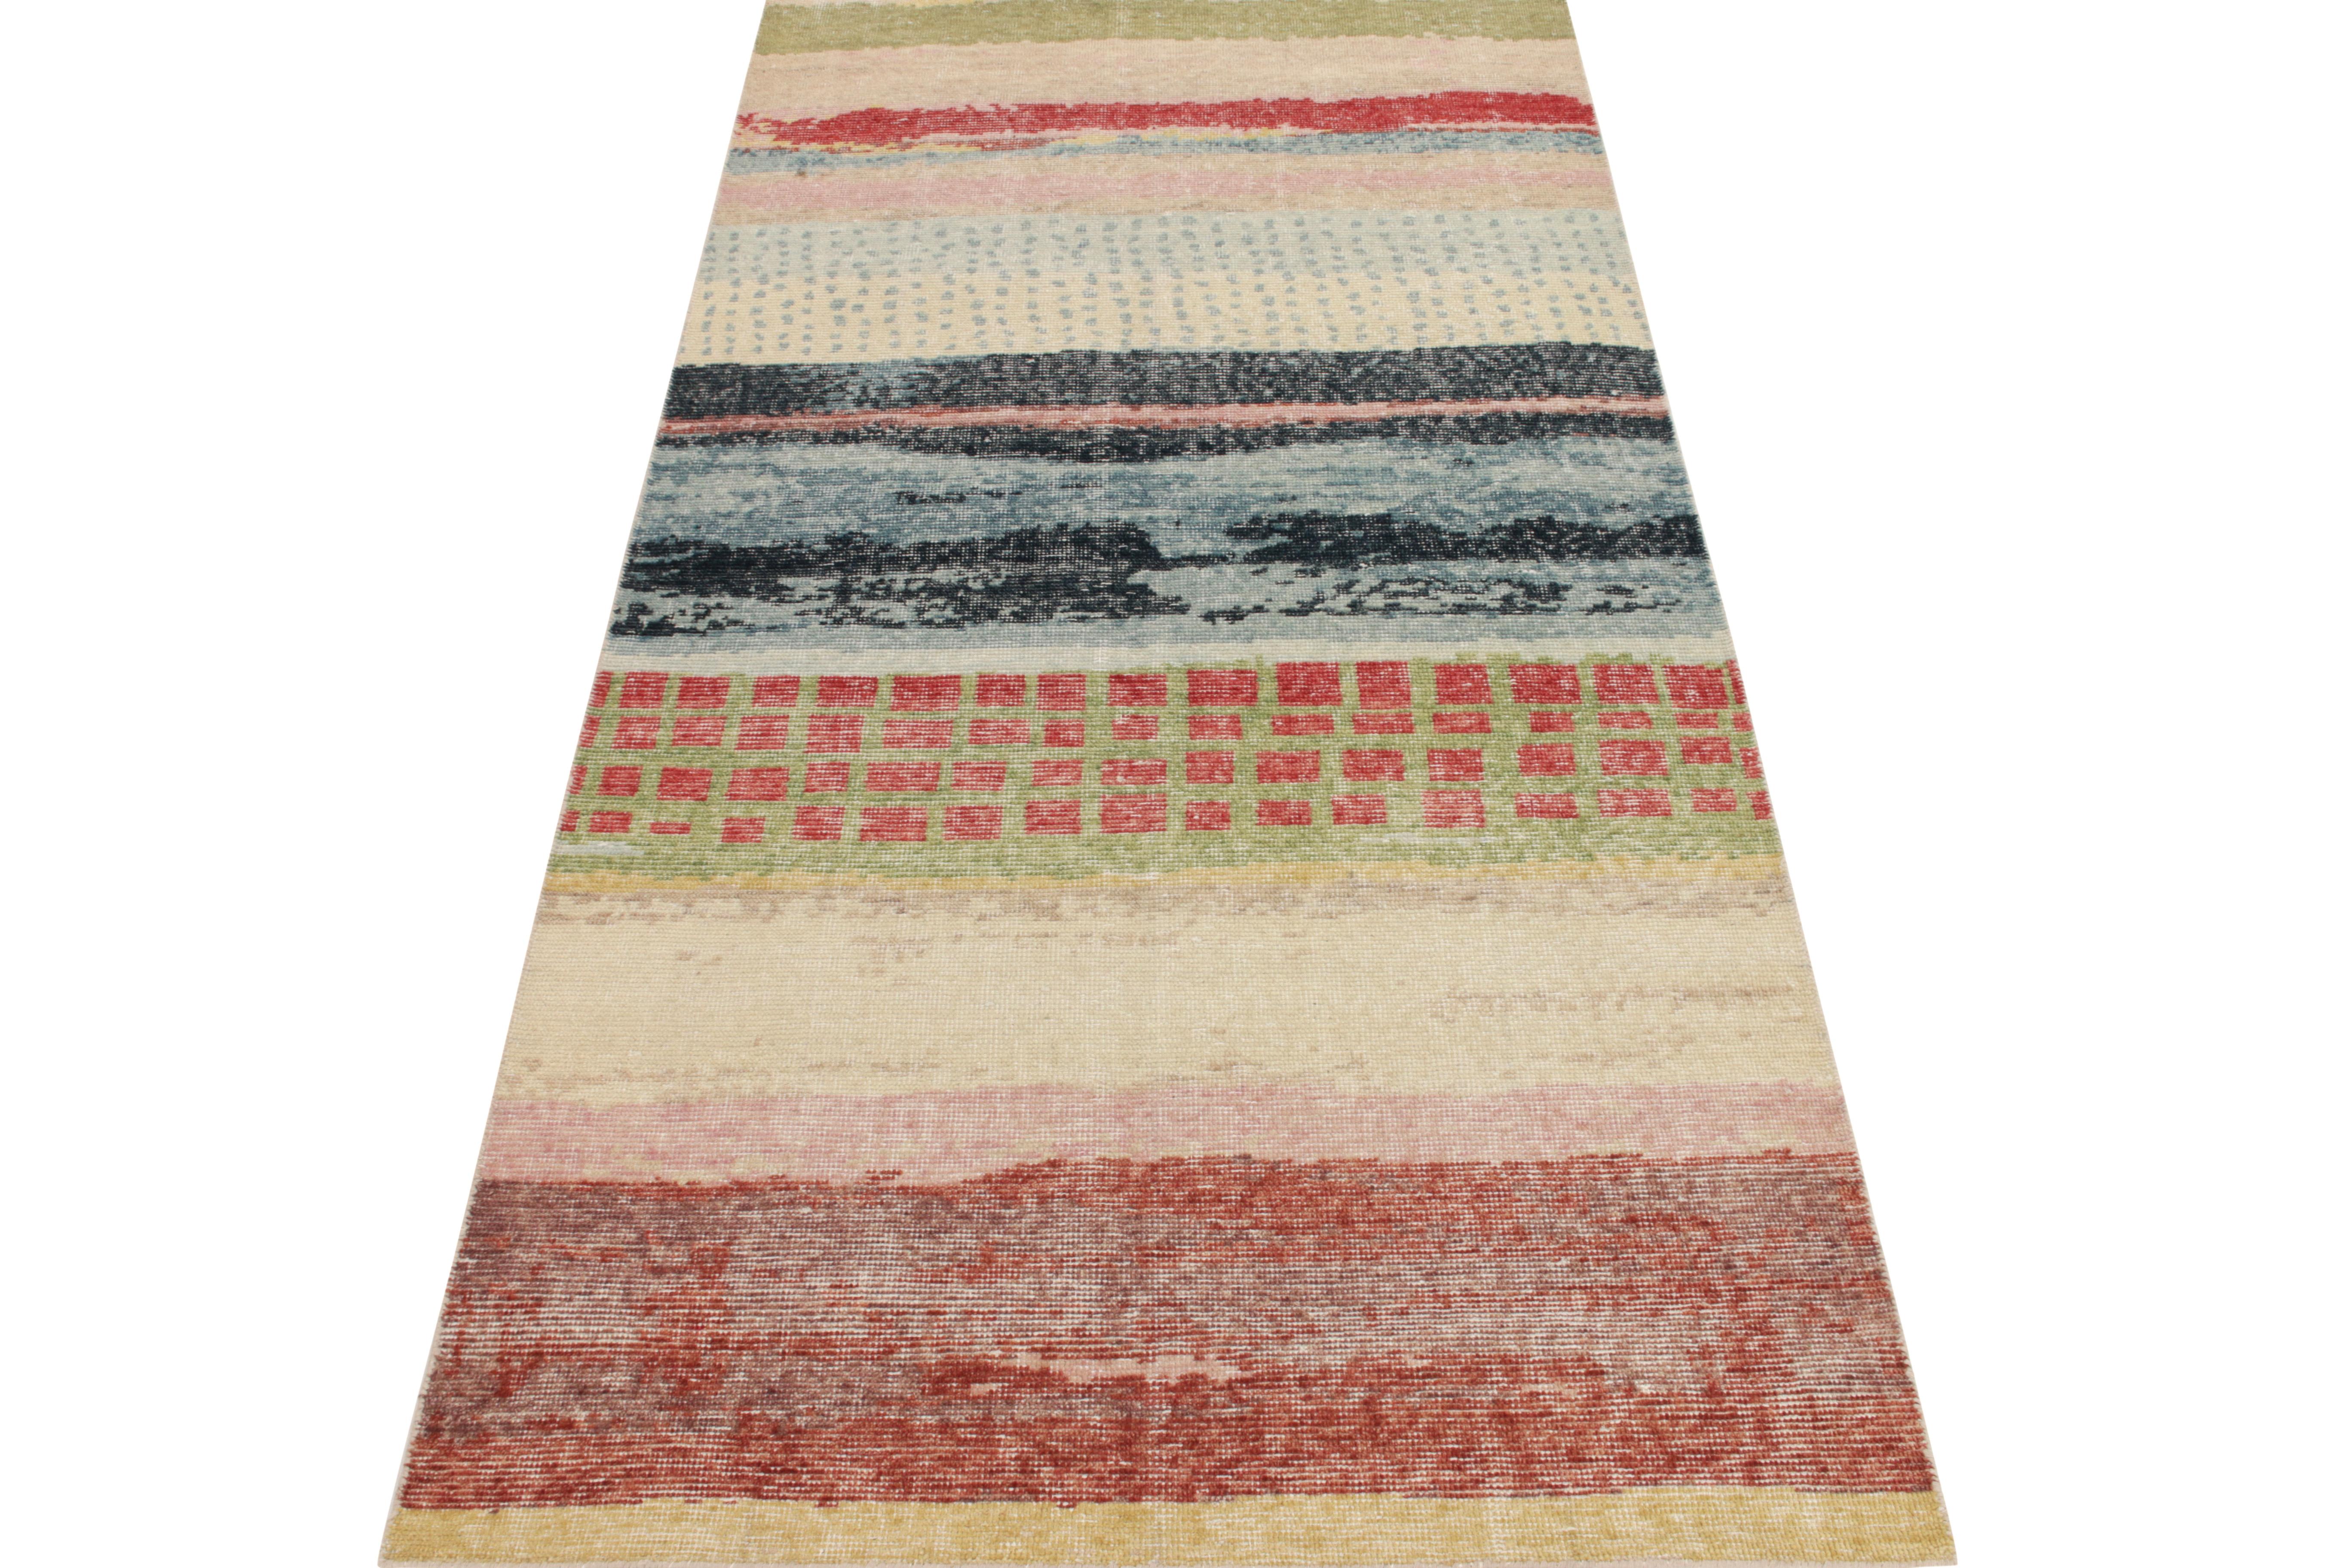 Hand-knotted in wool, a 4 x 8 custom abstract vision from Rug & Kilim’s Homage collection. This painterly rug enjoys a riot of fun colors primarily in hues of pink, red, green, blue and beige woven artfully for unparalleled pagination & movement in